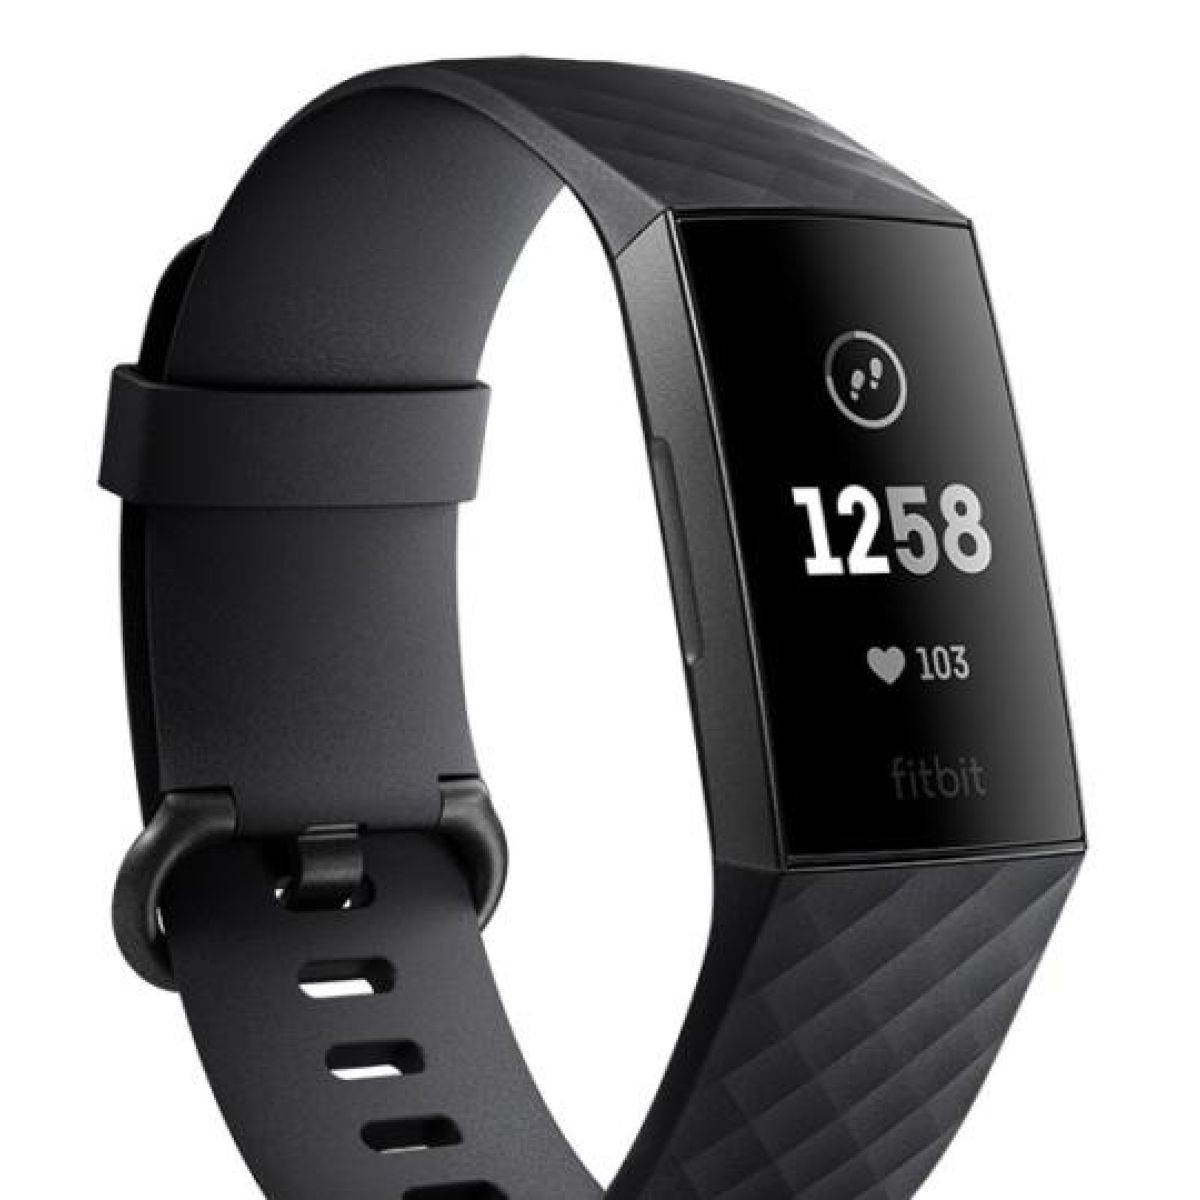 Fitbit Charge 3: Fitness tracker gives 